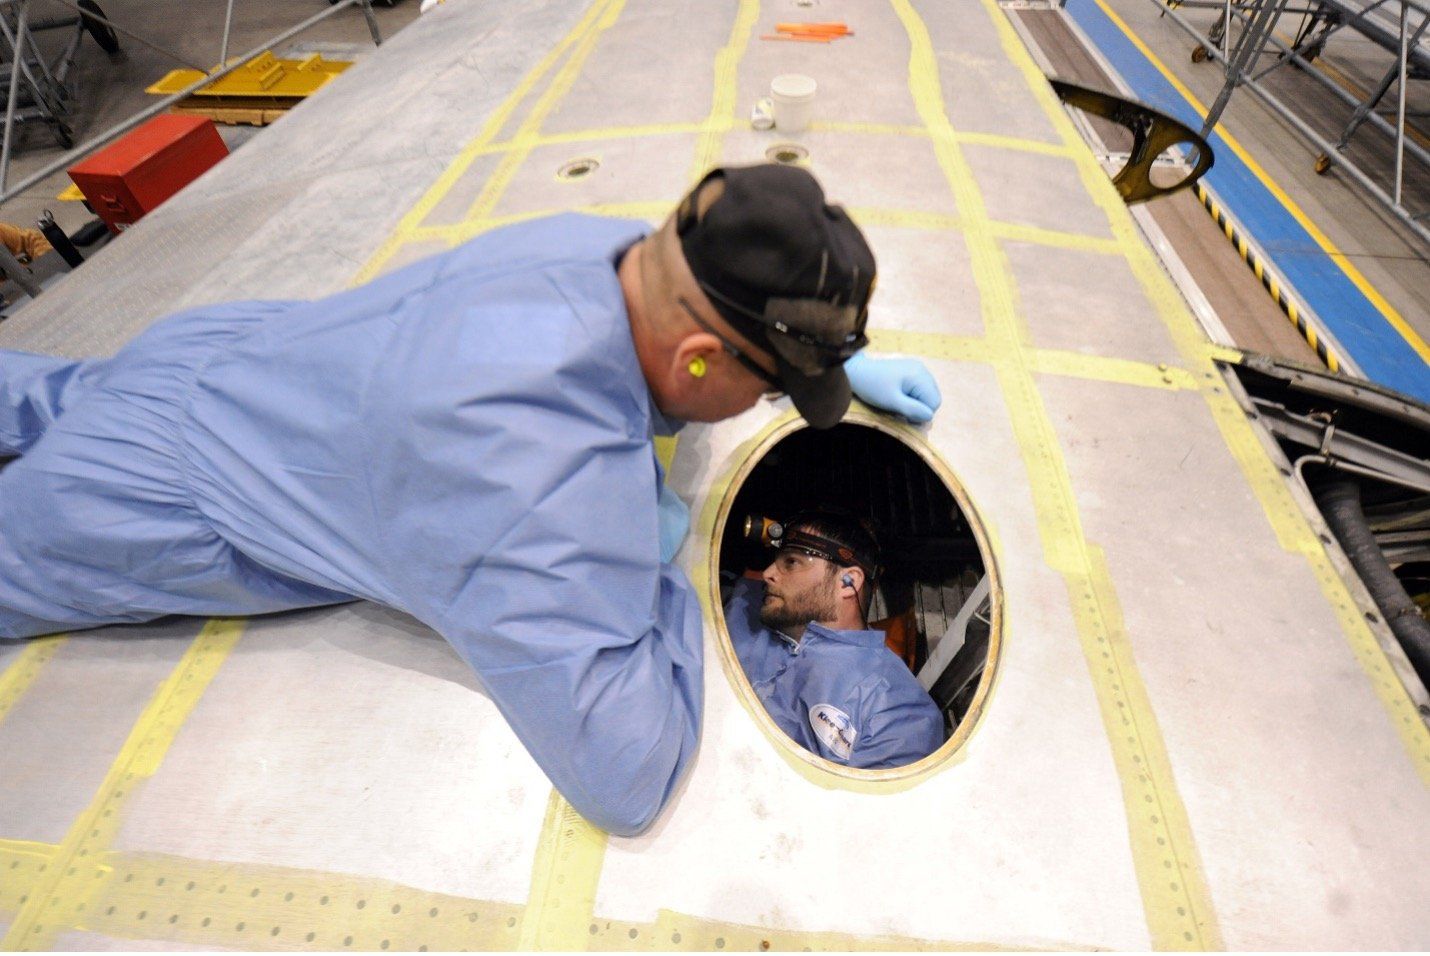 Man working in confined space while another watches.